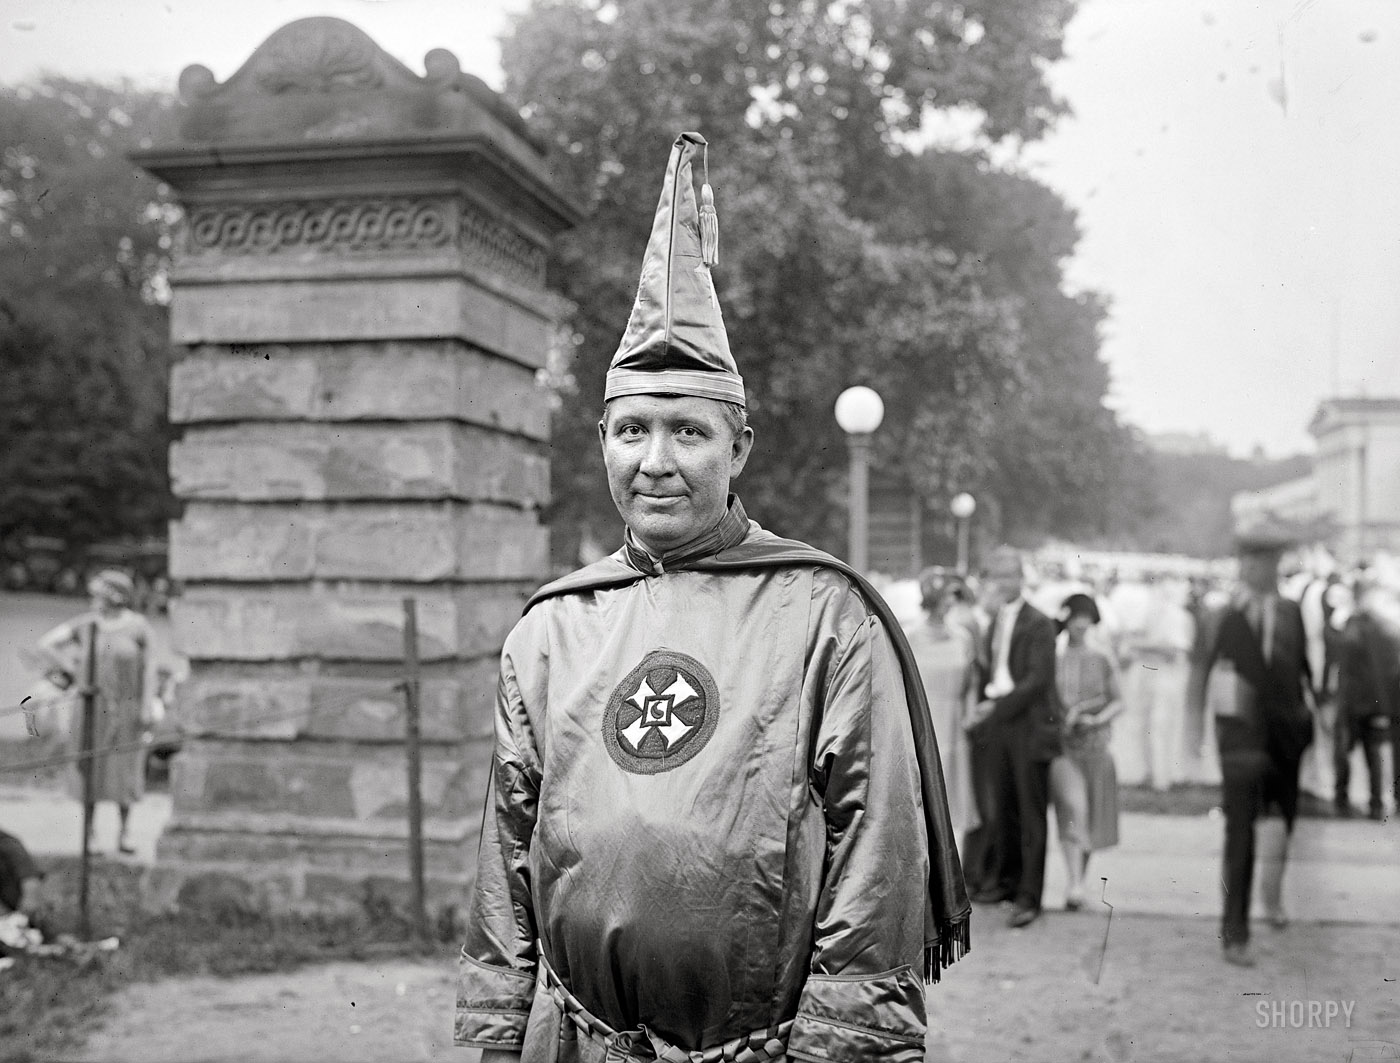 August 8, 1925. "Dr. H.W. Evans, Imperial Wizard." More from the KKK konklave. National Photo Company Collection glass negative. View full size.